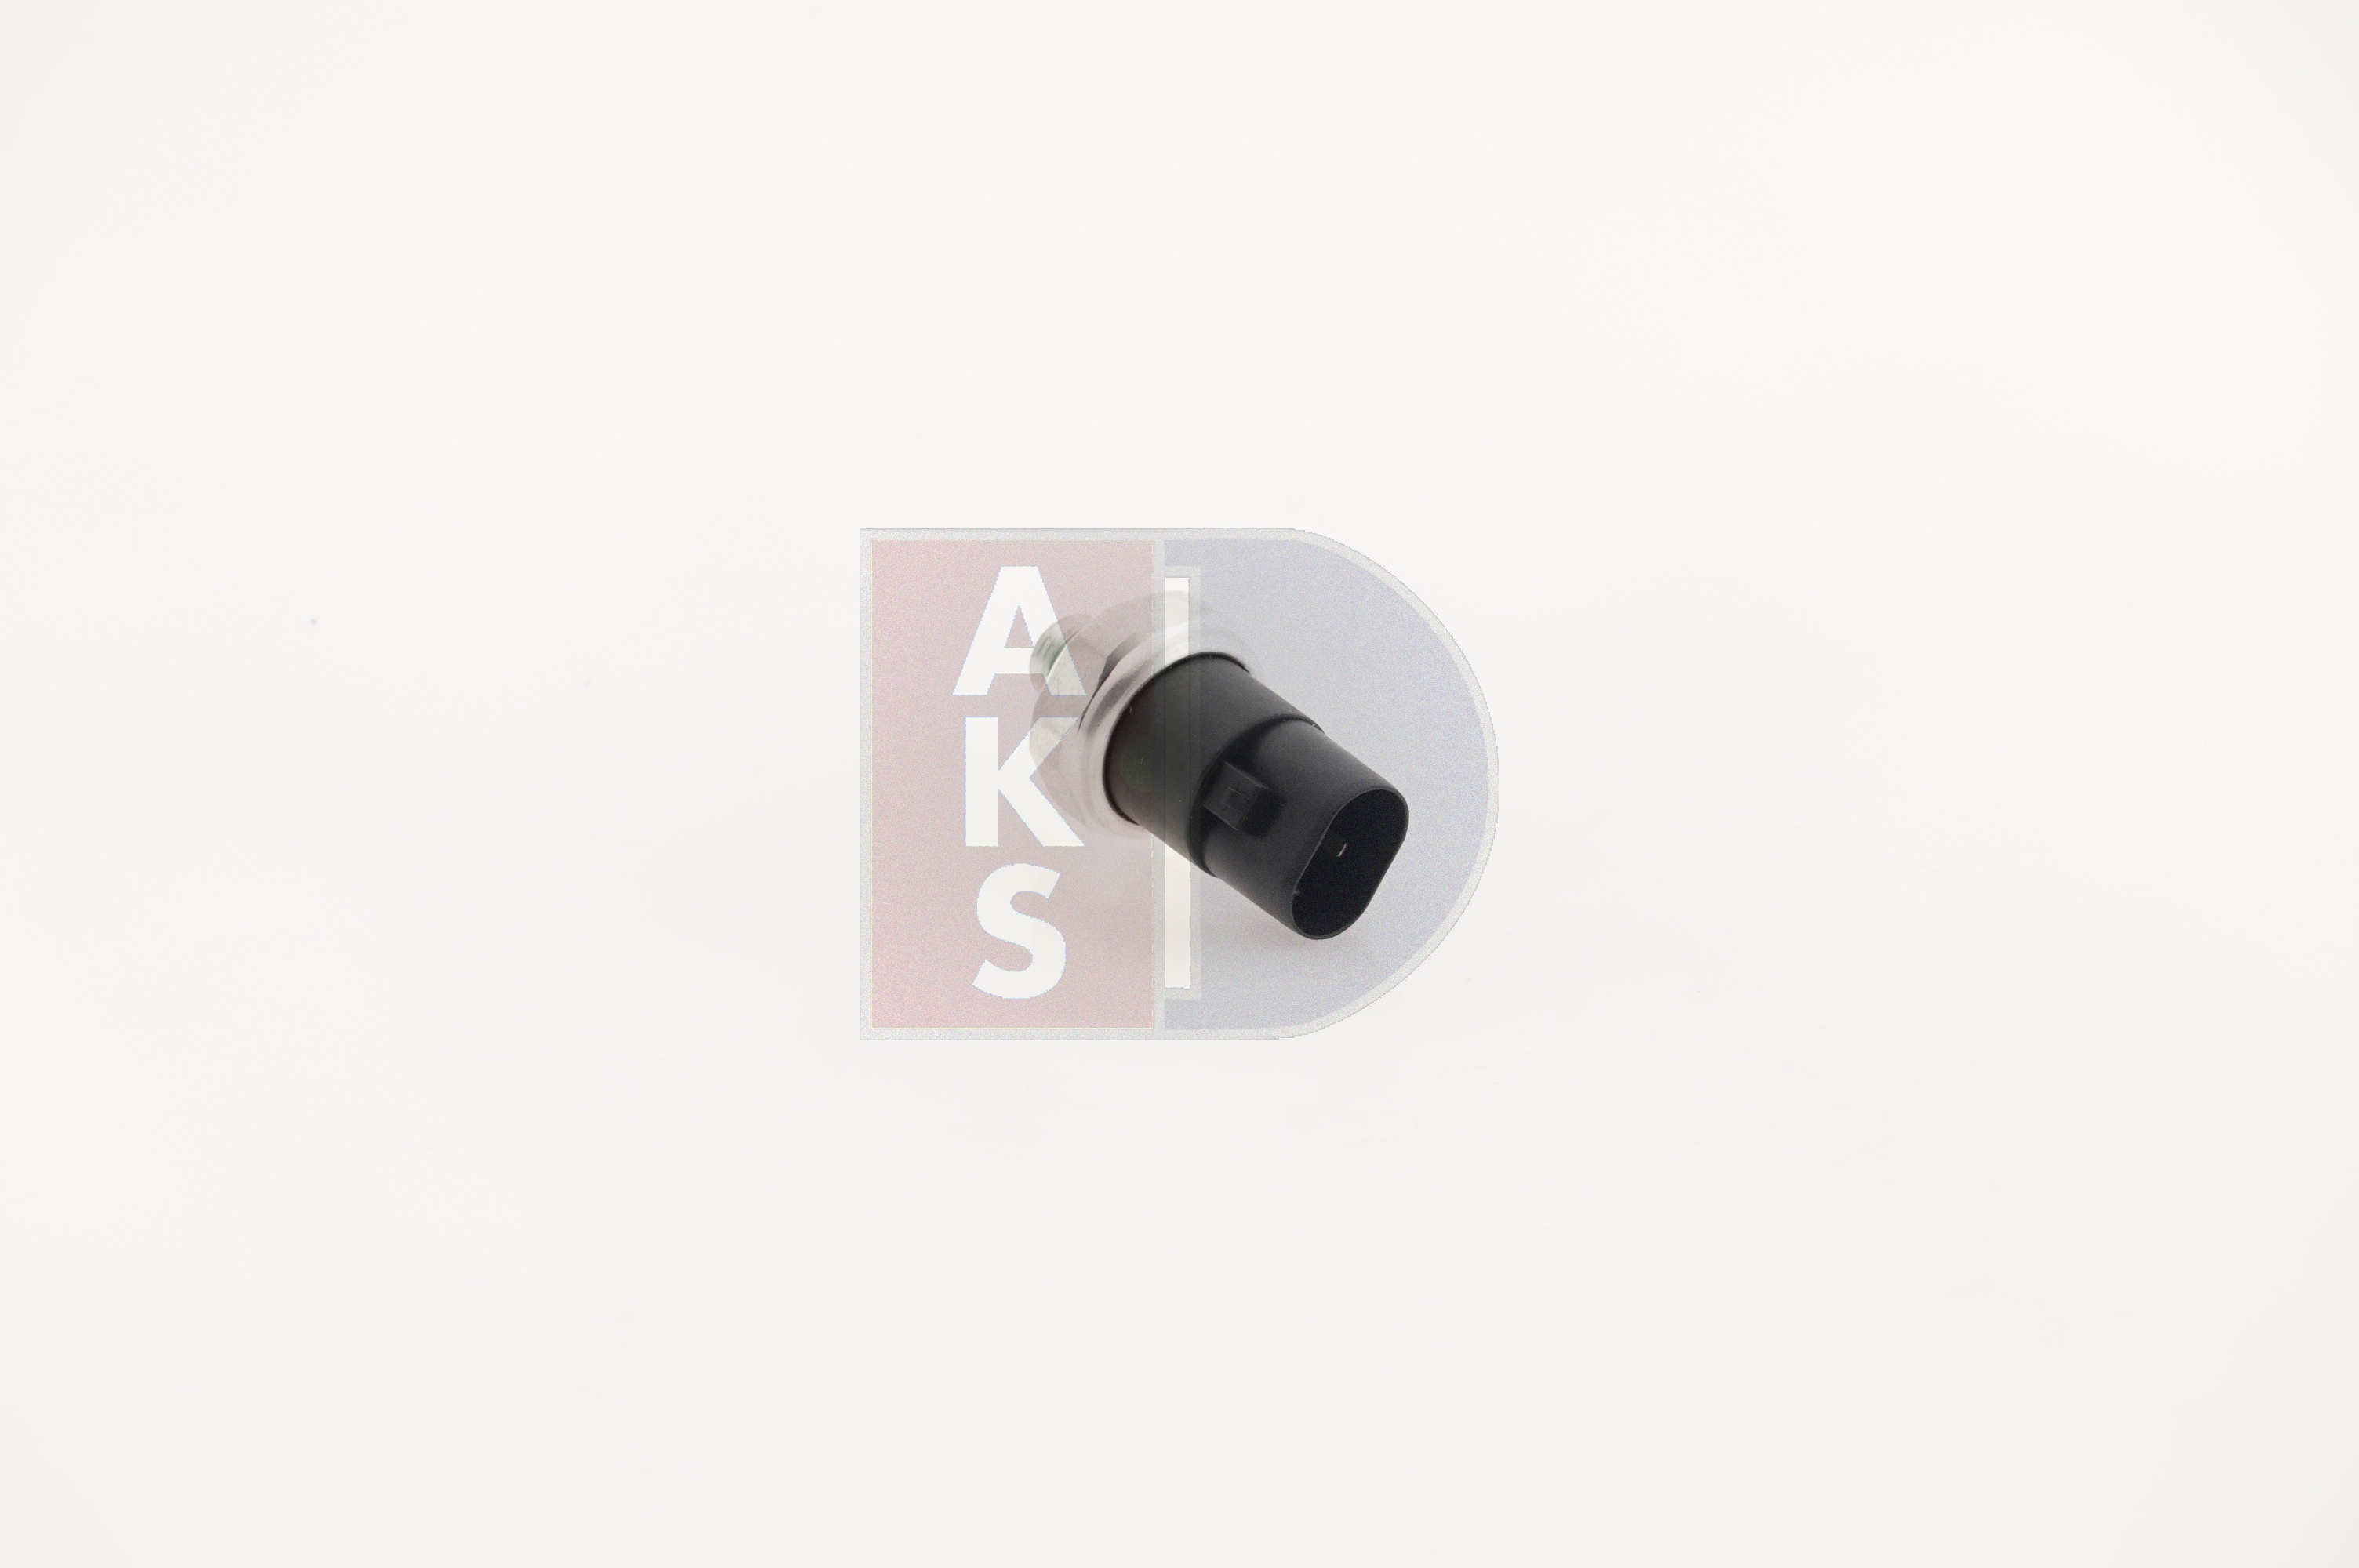 Toyota Air conditioning pressure switch AKS DASIS 860076N at a good price